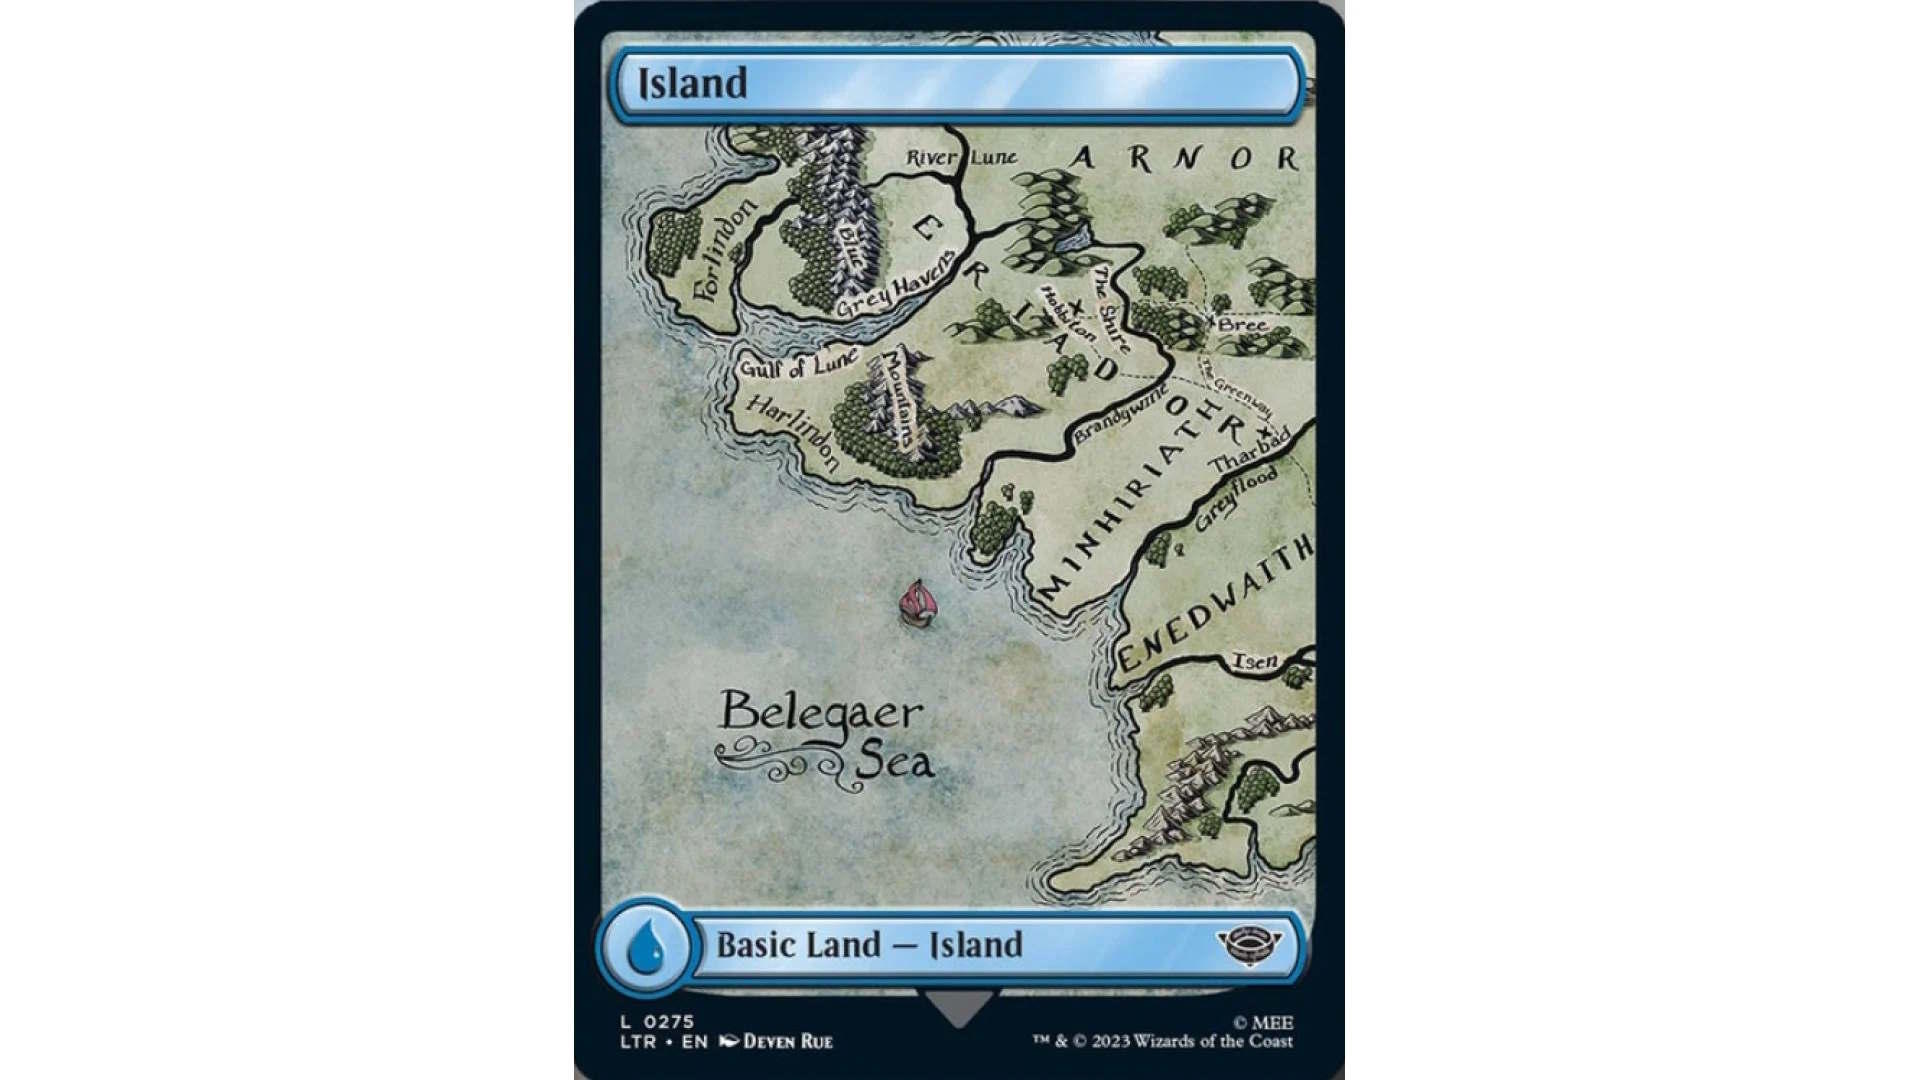 mtg-magic-the-gathering-cards-spoilers-lord-of-the-rings-lotr-lands-island.jpg